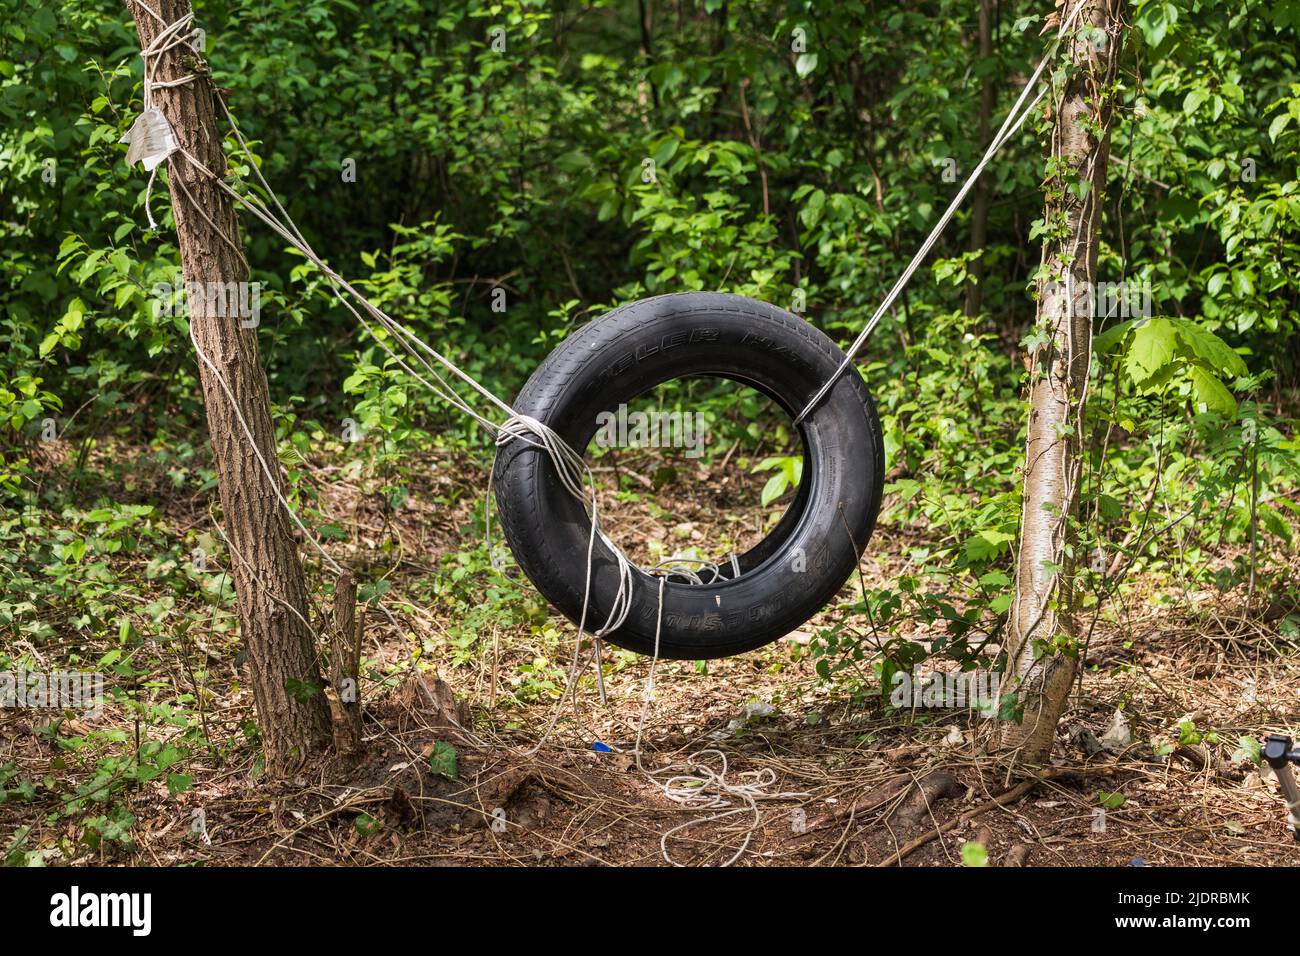 Simple swing in the forest, improvised construction with car tire and rope between two trees. Stock Photo